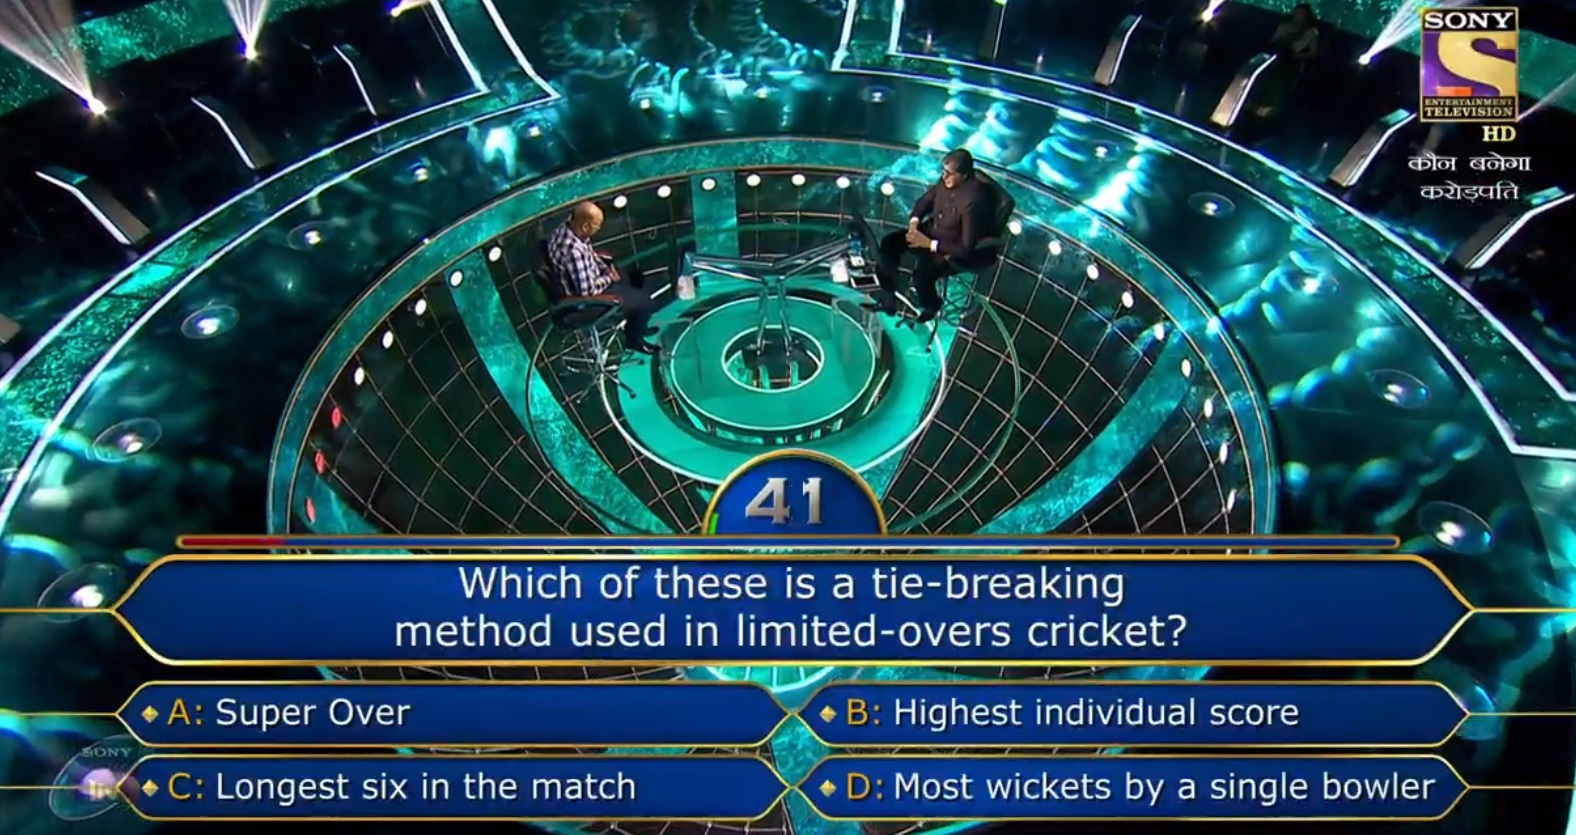 Ques : Which of these is a tie-breaking method used in limited-overs cricket?